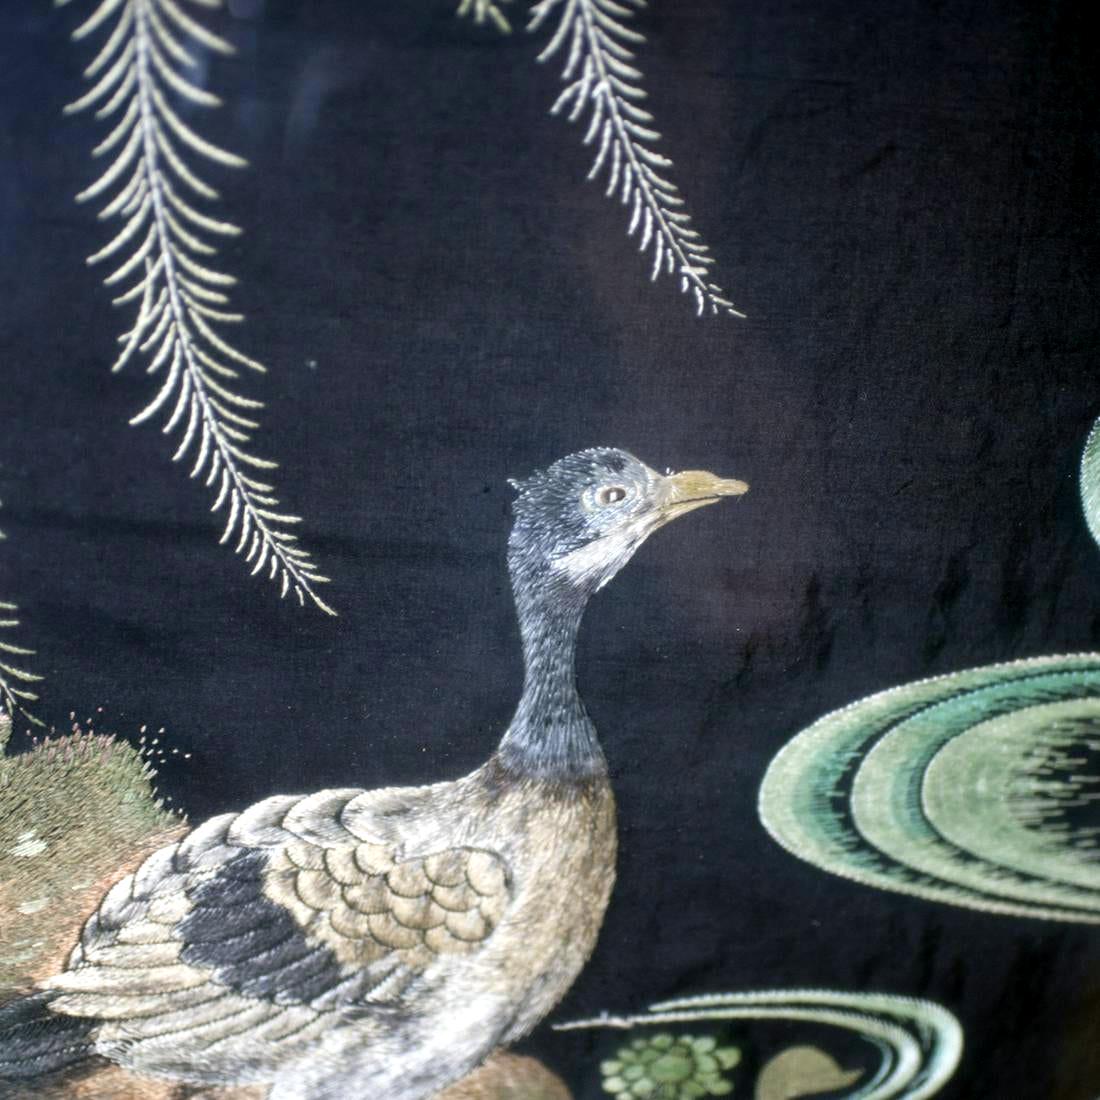 An exquisite Japanese embroidery piece circa end of 19th-early 20th century of Meiji period. The silk panel depicts an idyllic water scenery, in which three mandarin ducks swim in the pond under a weeping willow. The stylized wrinkles on the water